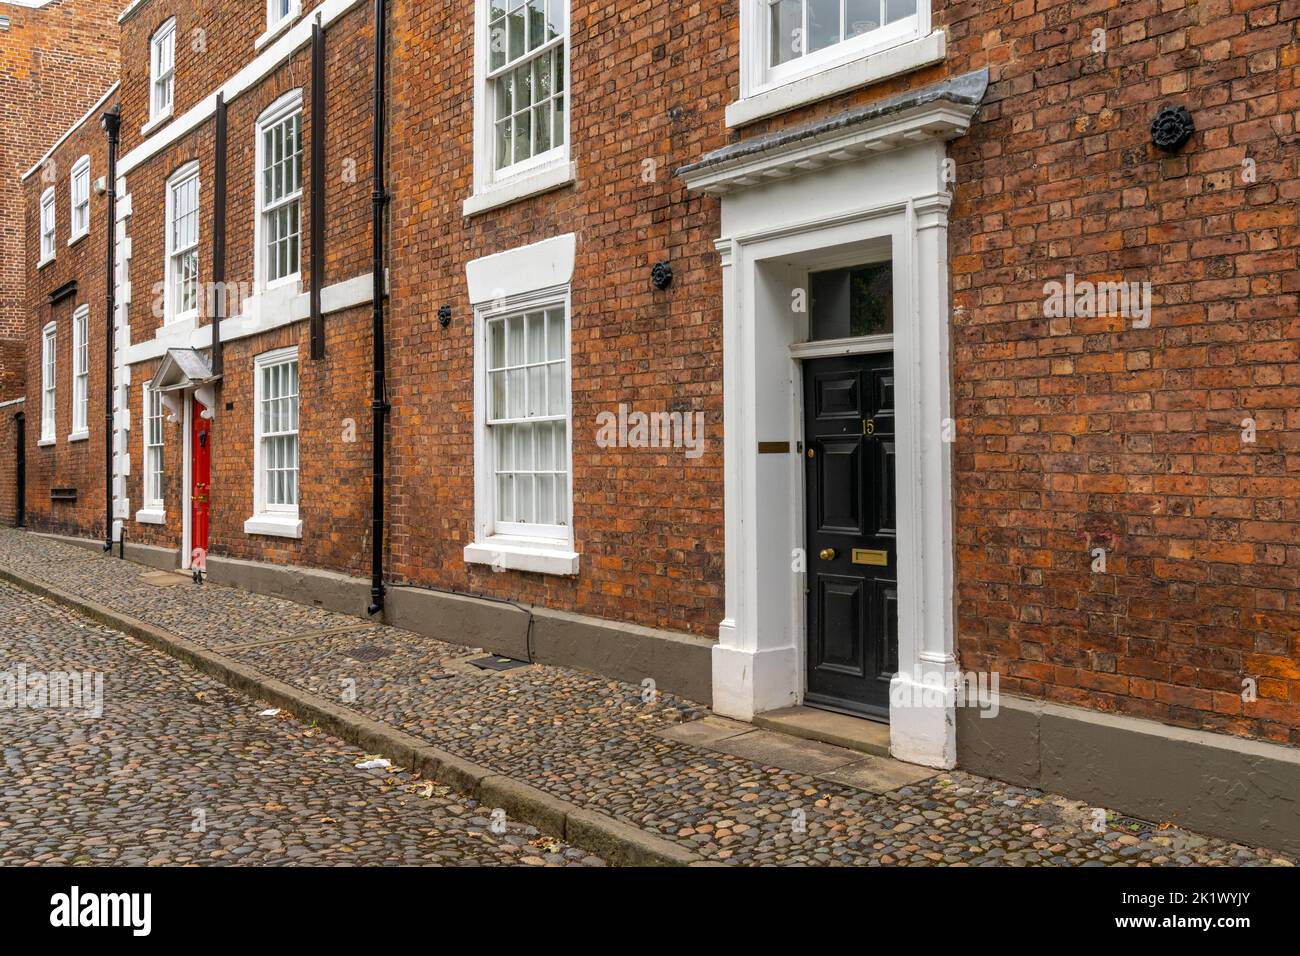 Chester, United Kingdom - 26 August, 2022: red brick buildings with colorful doors in typical English fashion in the historic city center of Chester Stock Photo